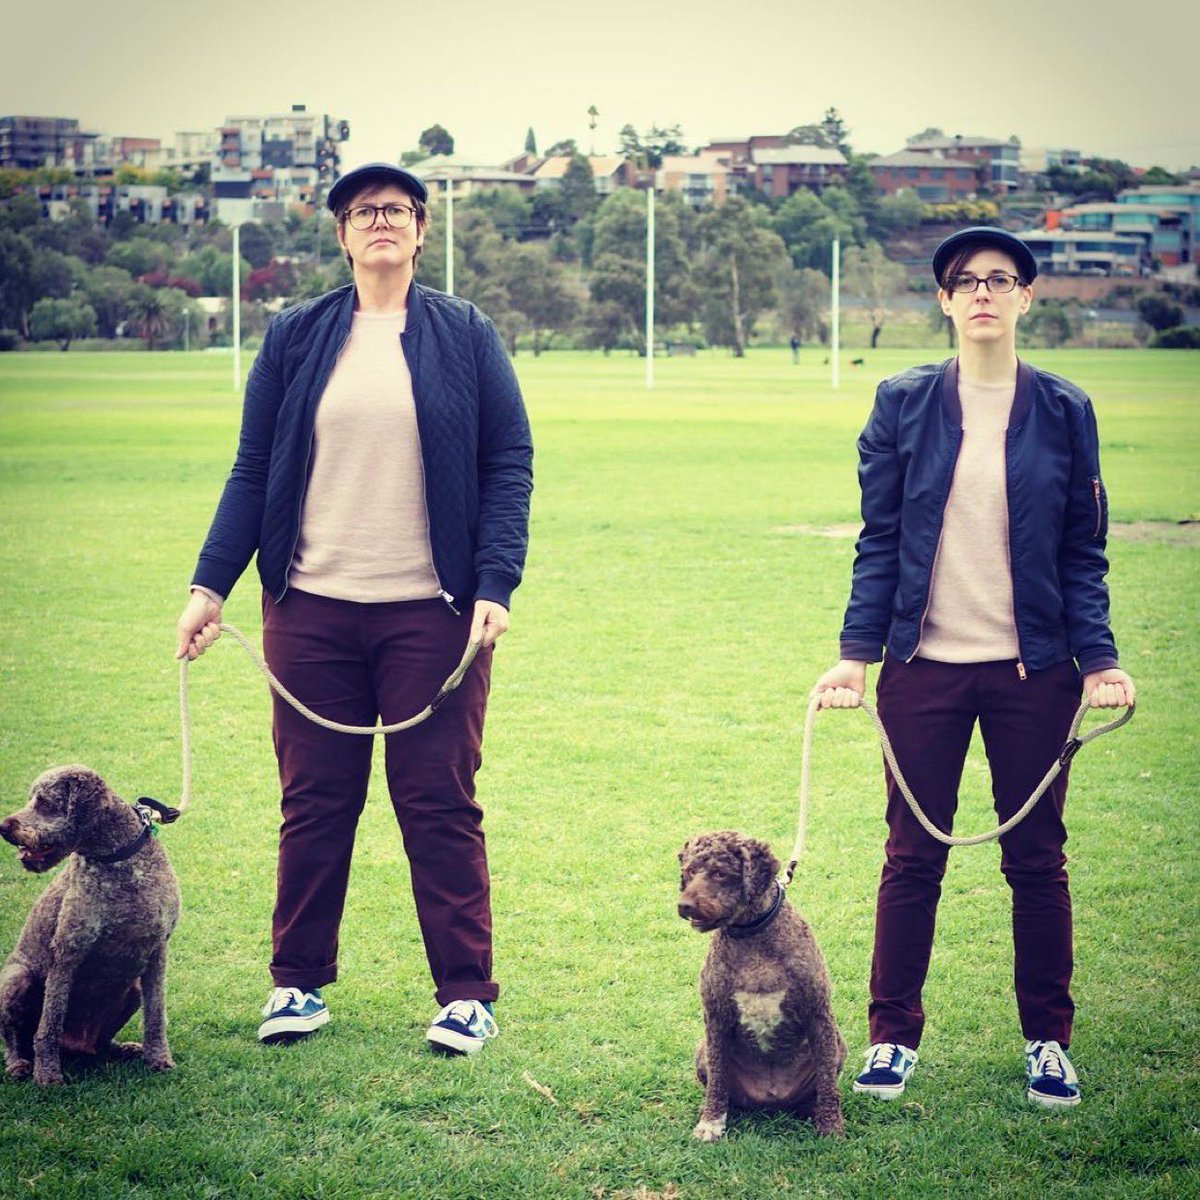 Just the facts today…this genuine little legend @DeAnne_Smith will be joining the #BodyOfWork tour this July as my support act…starting Friday in Toronto…because everyone needs a friend who is just themselves from further away…Eh?